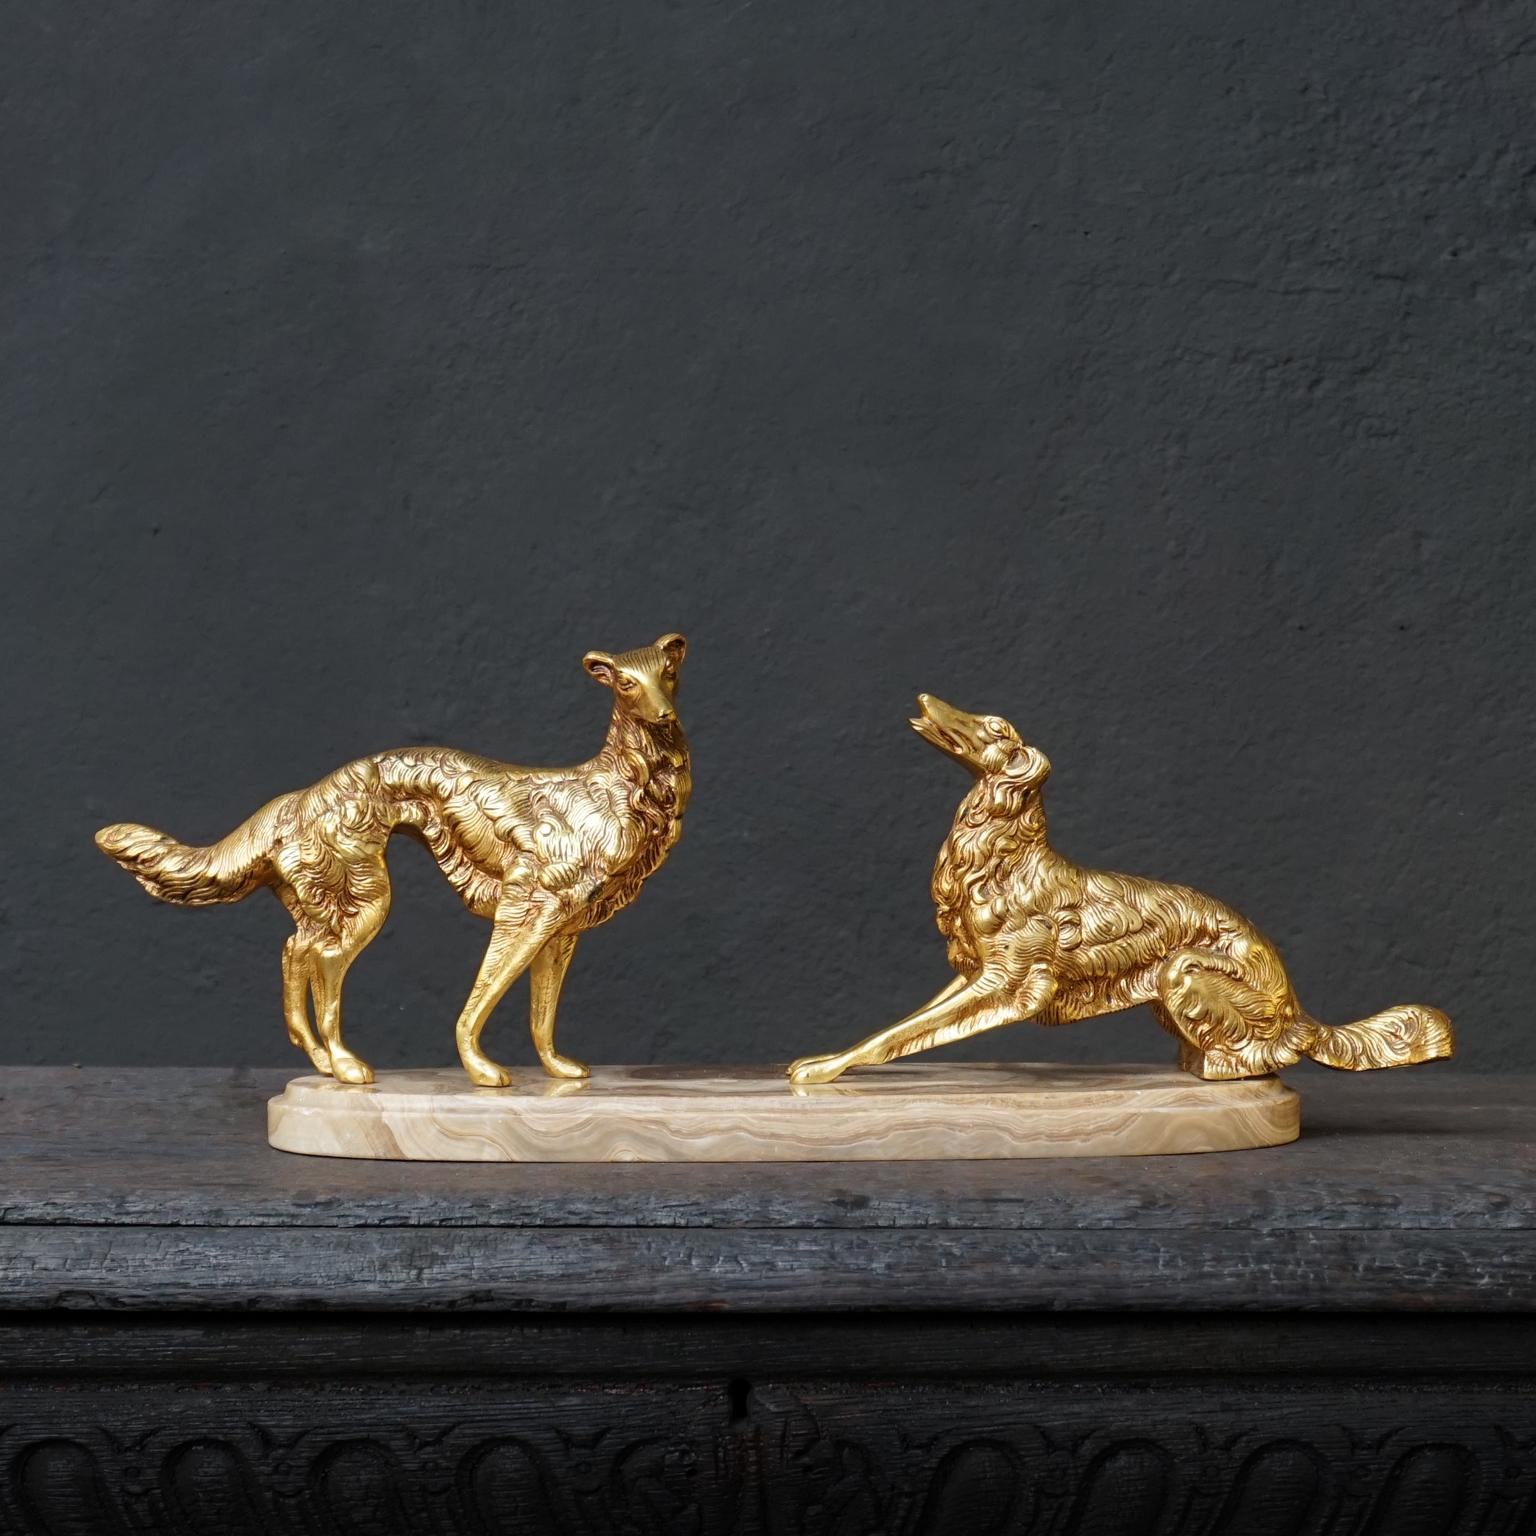 An antique French brass patinated Art Deco set of Borzoi dogs on a cream or 'cafe au lait' marble base.

Very pretty and decorative, its weight (6 kilo's) would make it an excellent paperweight.

The Borzoi Barzoi or Borzaya, also called the